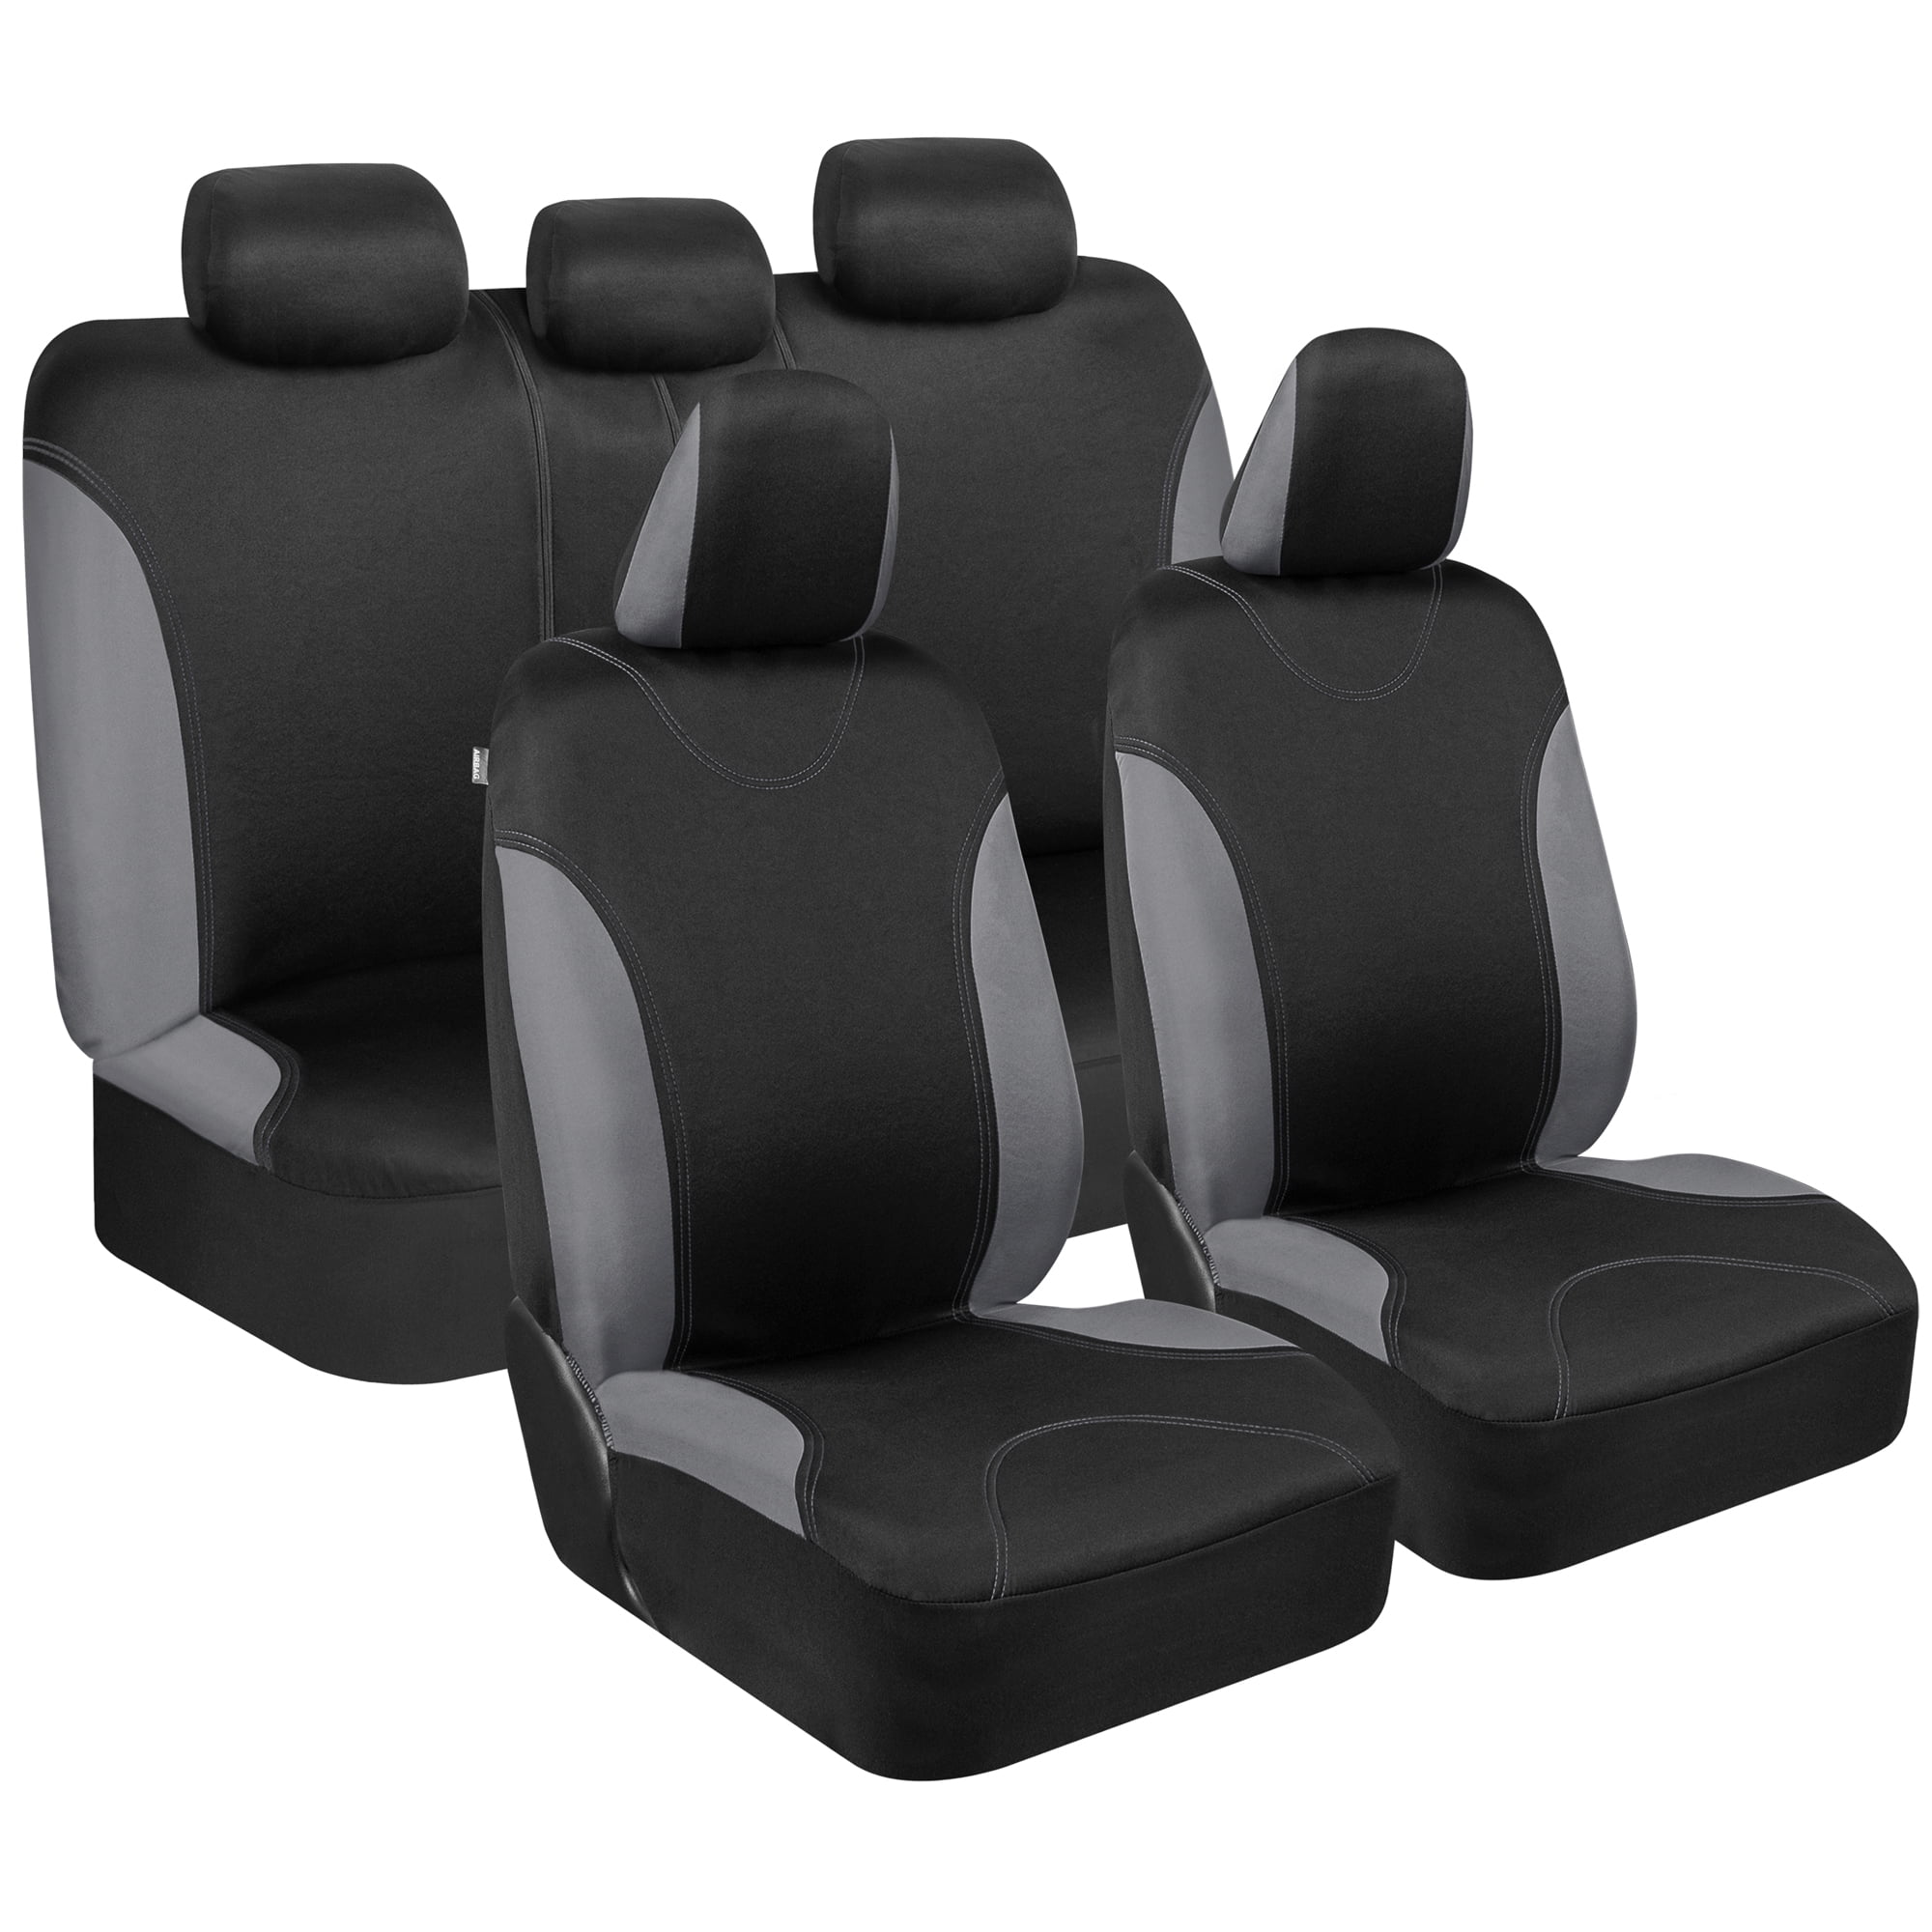 Magiona Car Seat Covers Full Set 9pc Sideless Front and Split Bench Back Seat Cover Set Easy Install Universal Fit for Car Auto Truck Van SUV Black